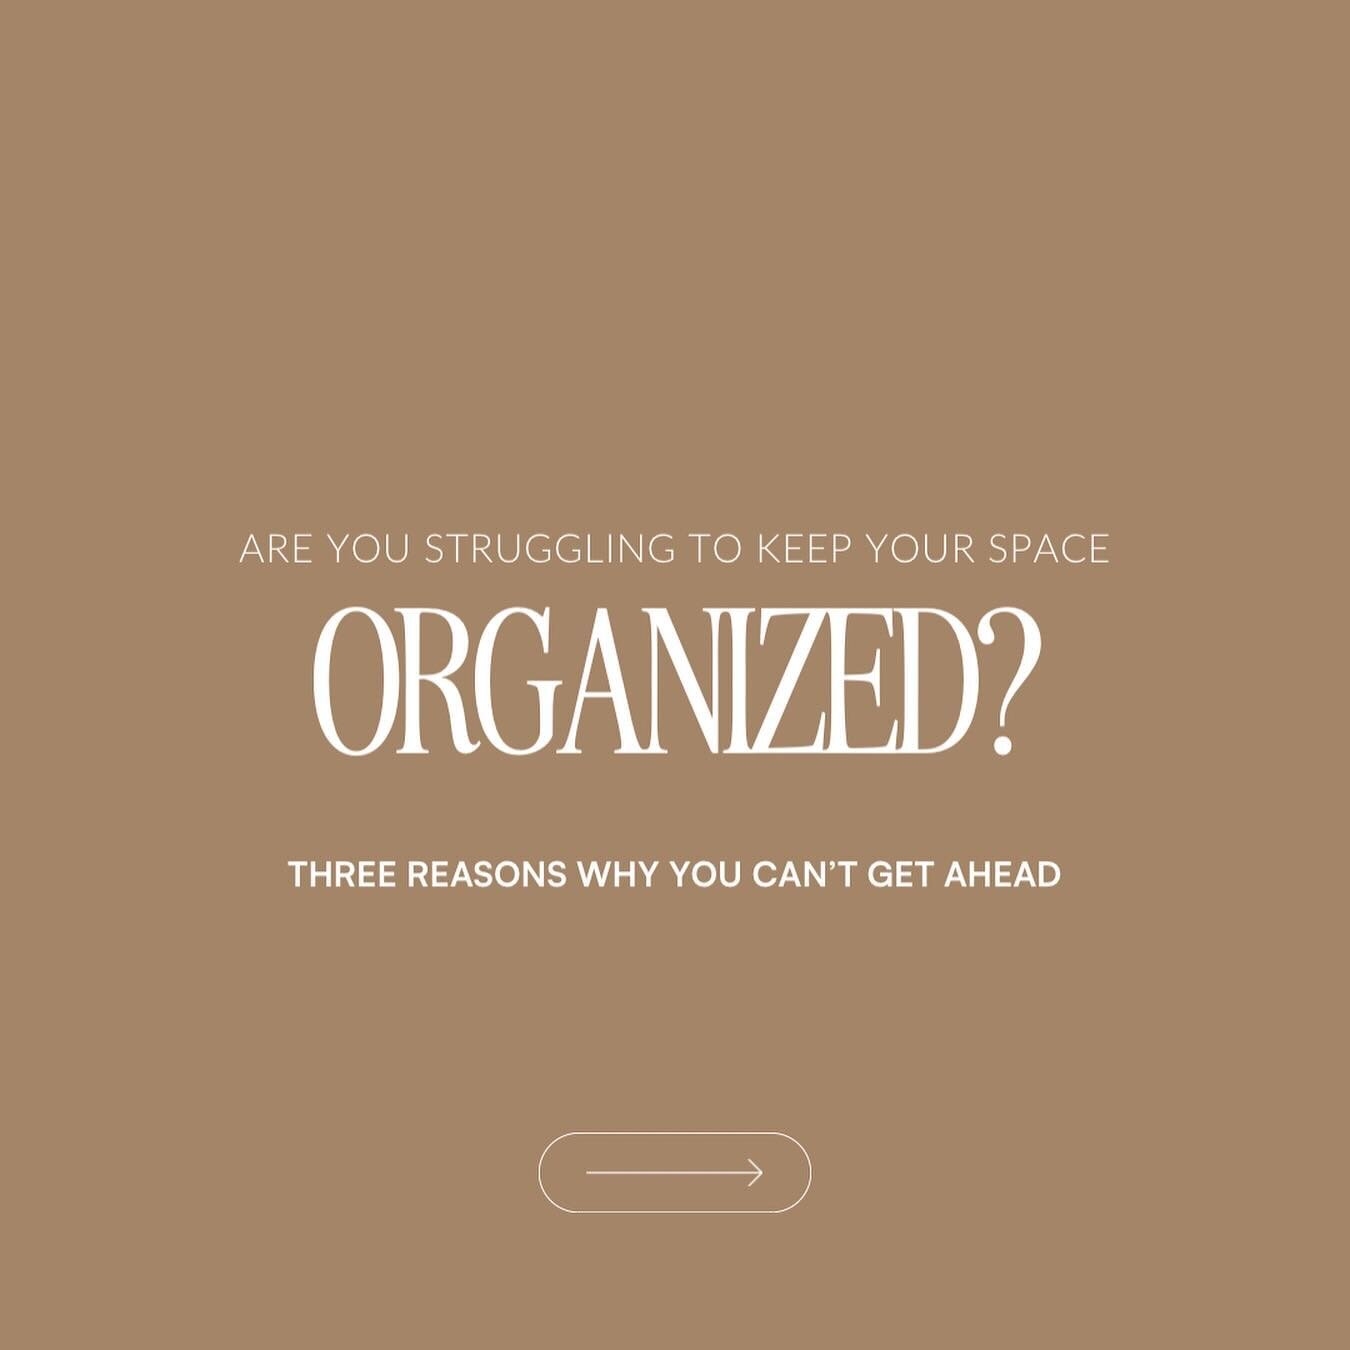 If you are struggling to get organized it&rsquo;s probably because of one of these three things (swipe to find out).

As we head into spring, we&rsquo;re thinking of bringing back our editing challenge. It would mean weekly prompts and tips to tackle